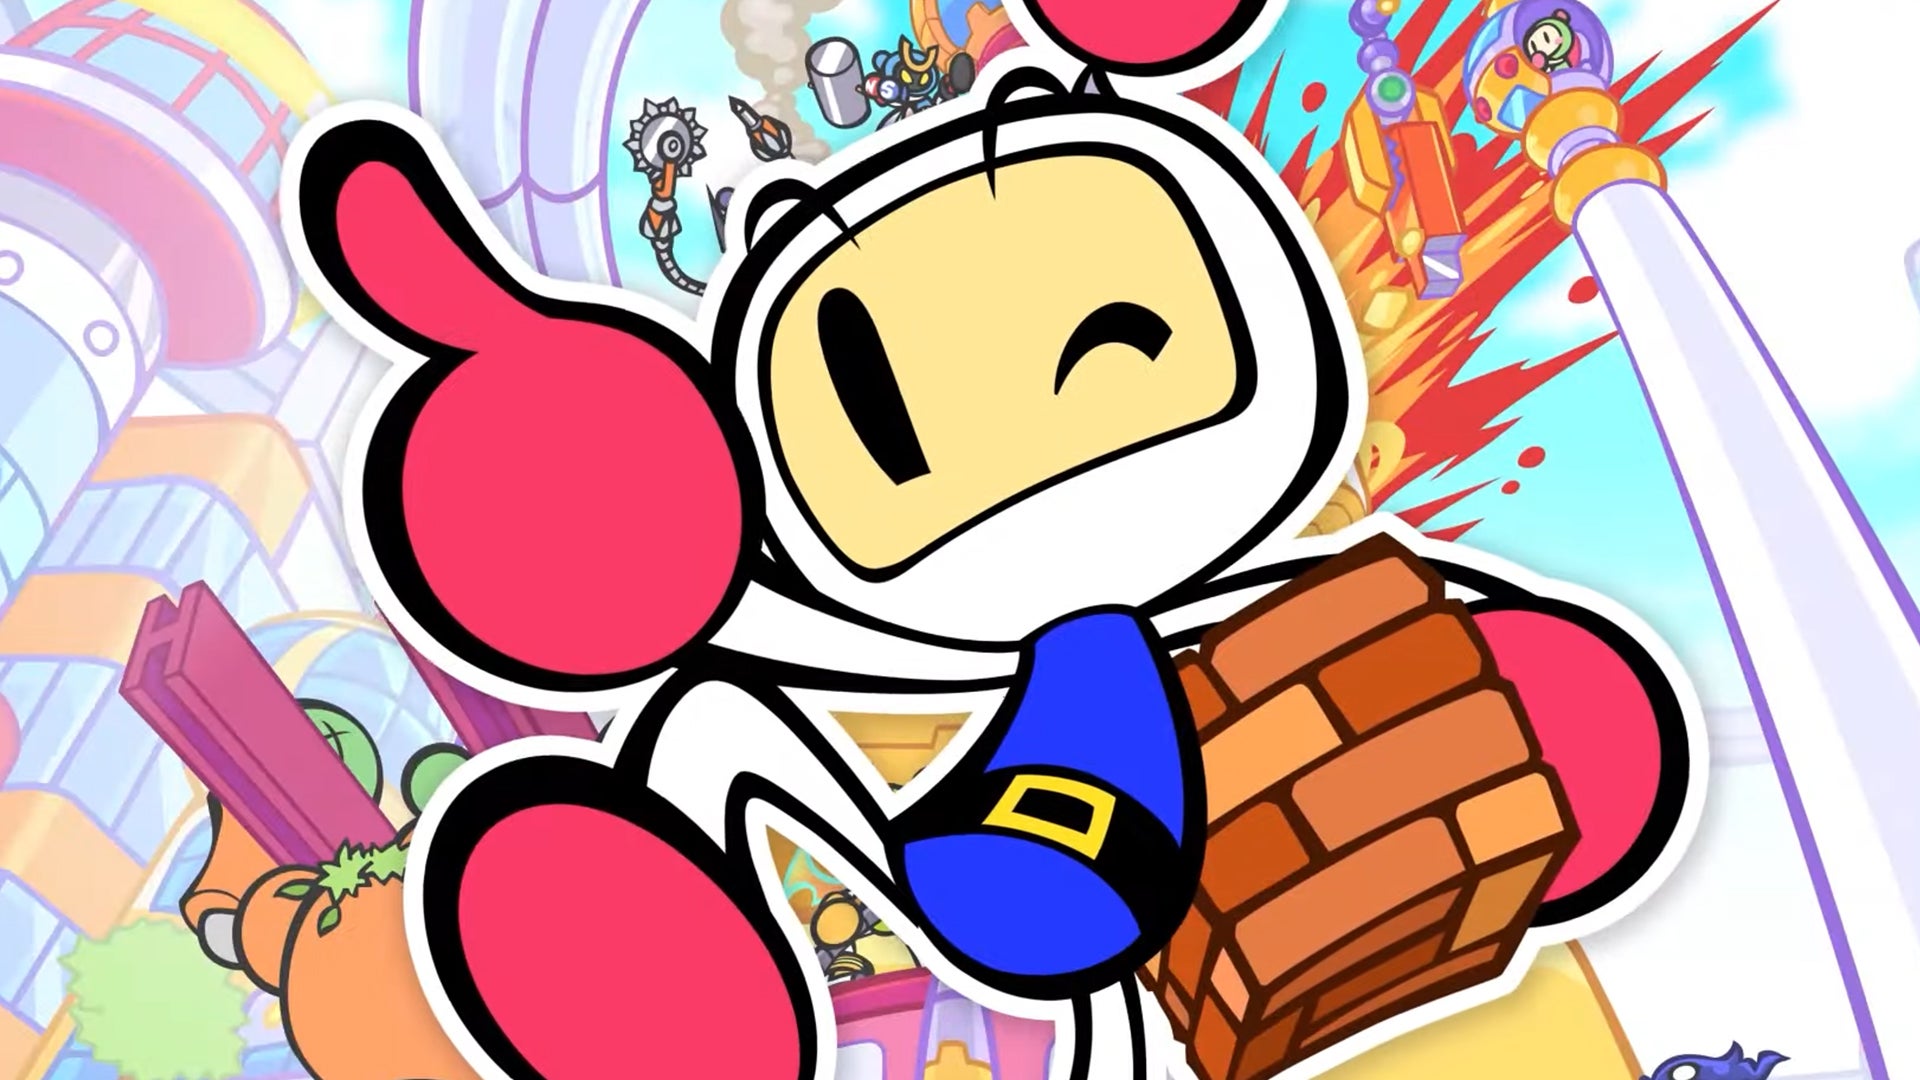 You are currently viewing The Explosive Multiplayer Excitement of Bomberman: A Dud of a Story Mode Review